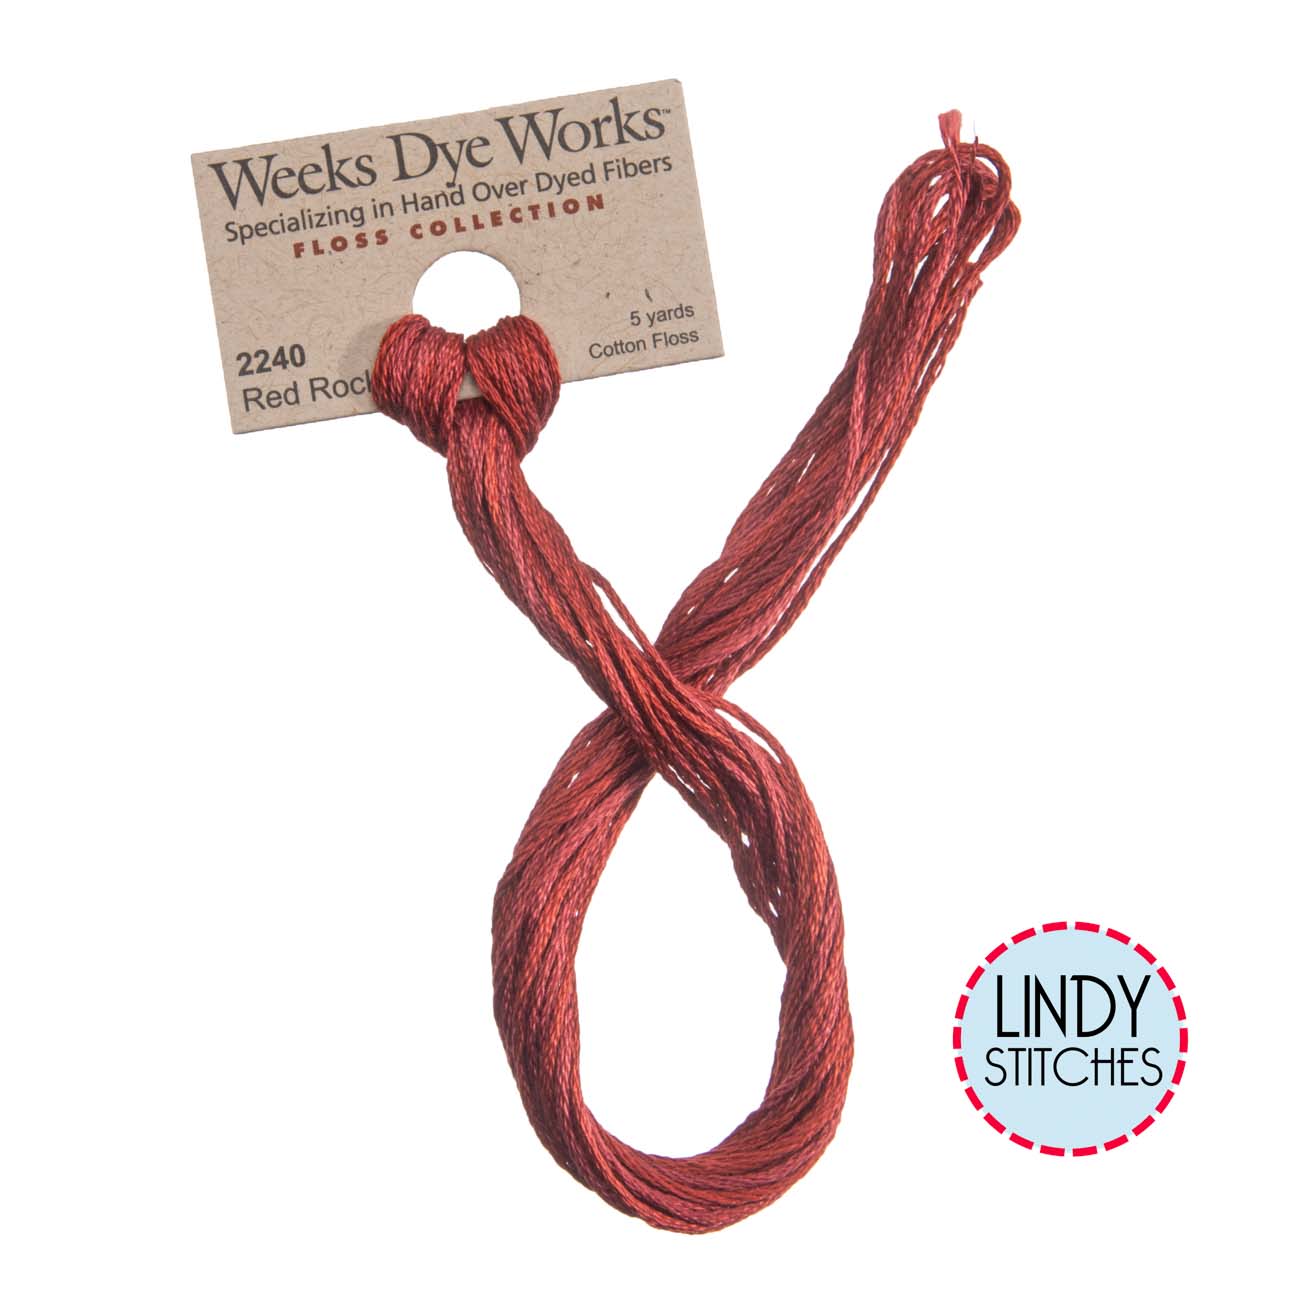 Red Rocks Weeks Dye Works Floss Hand Dyed Cotton Skein 2240